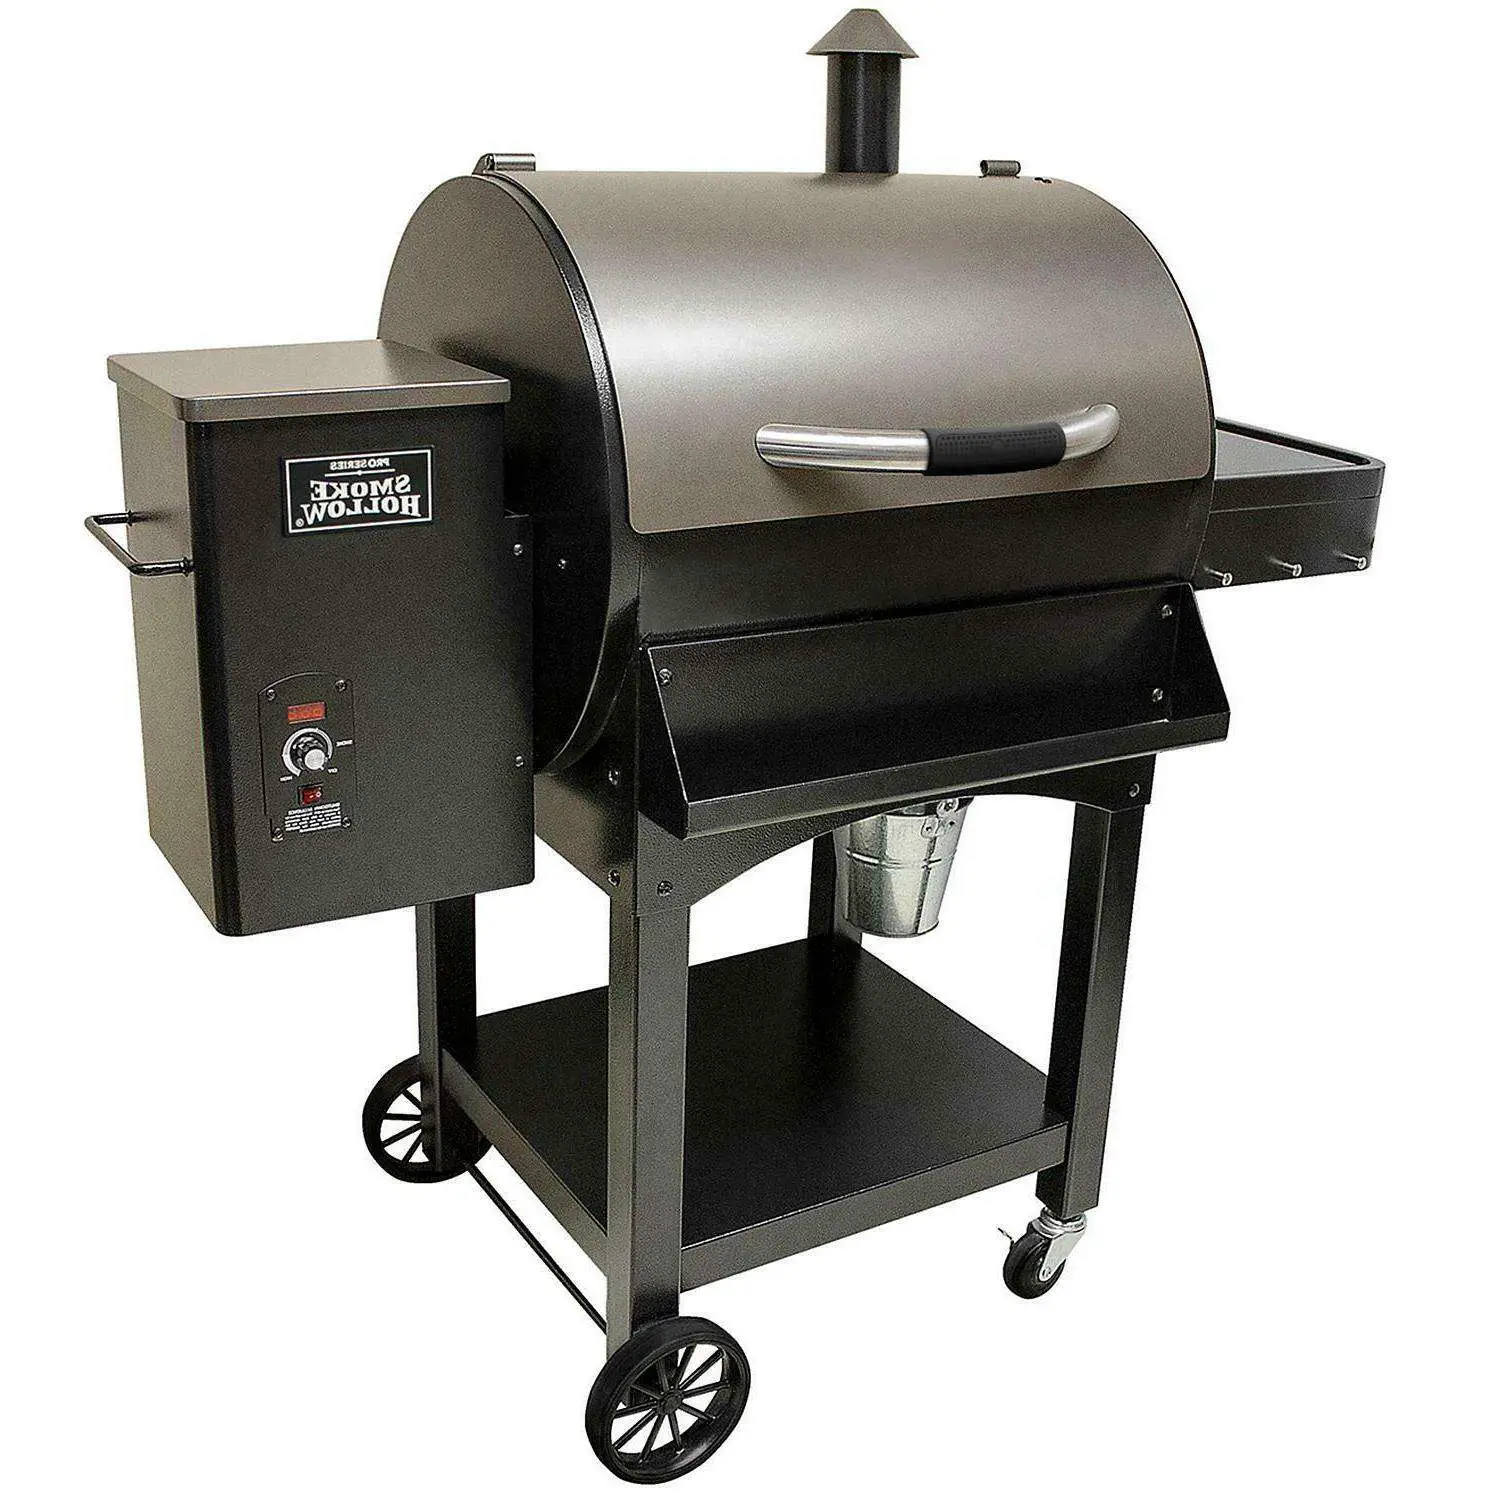 Pellet BBQ Smoker Grill 440 sq.in. Cooking Area,